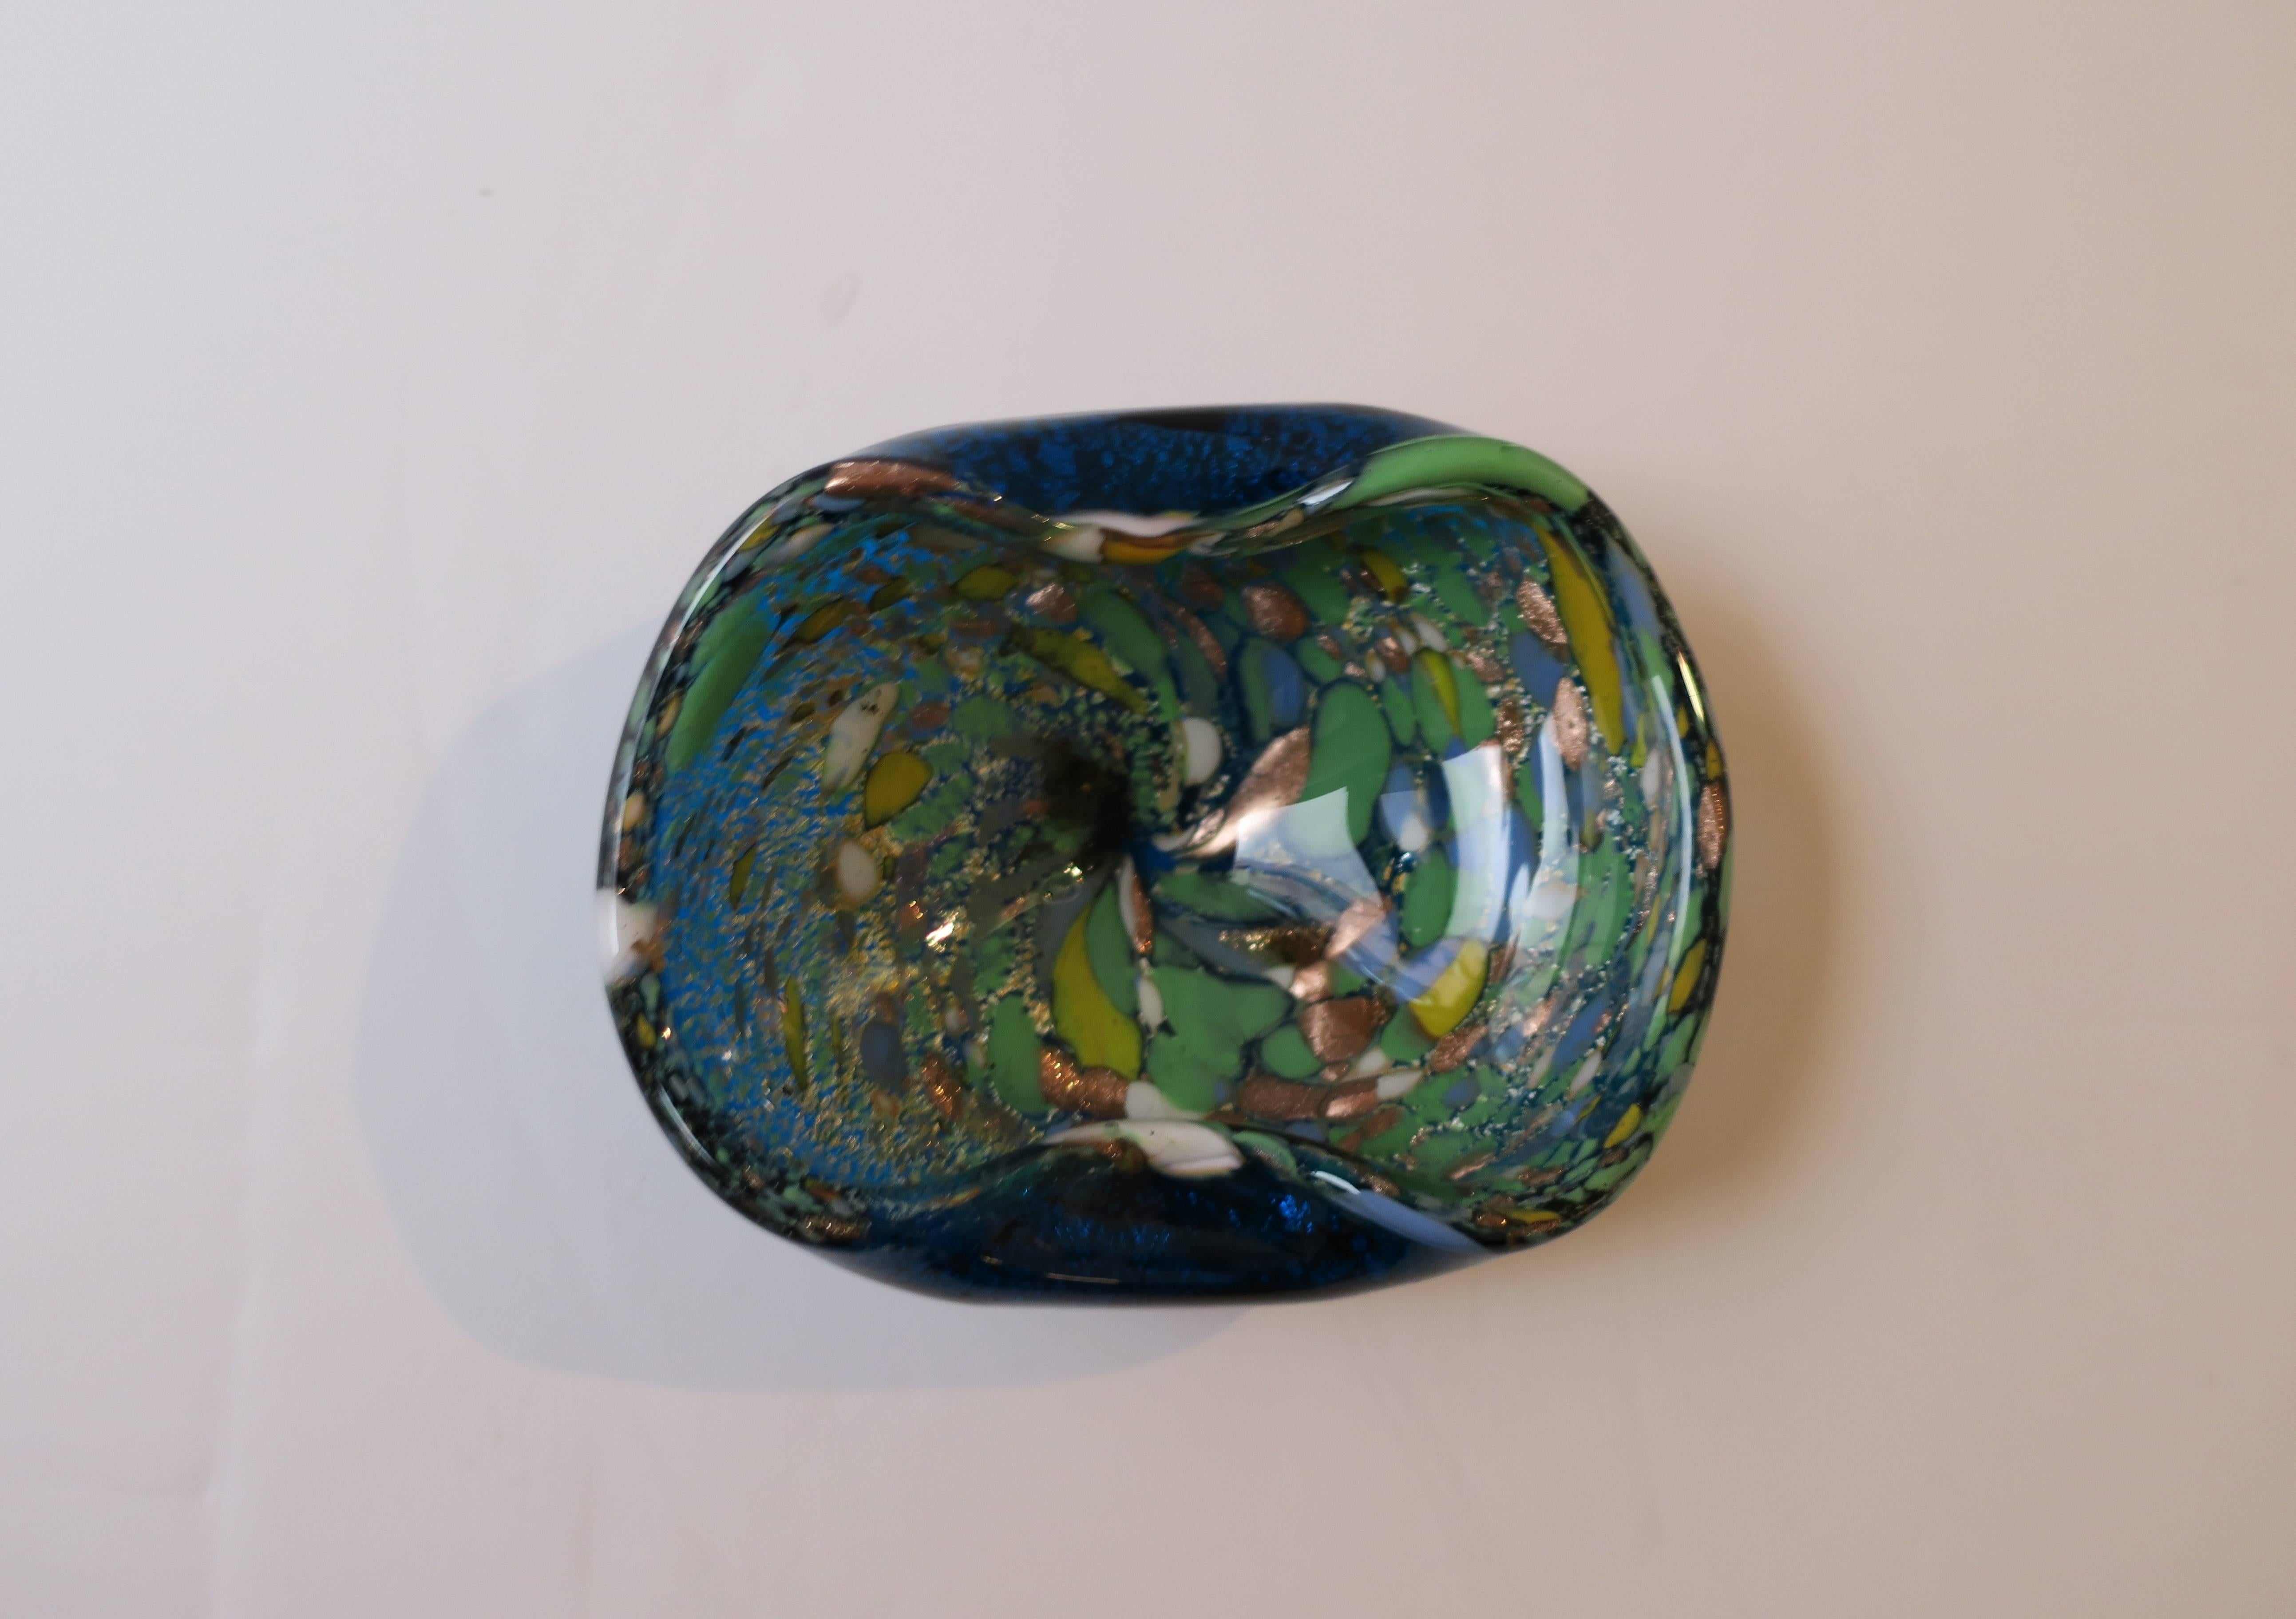 A beautiful small vintage Italian Murano art glass bowl, made of predominantly blue glass, but also with copper, gold, periwinkle blue, green, white and yellow, as shown in images. Bowl measures: 5